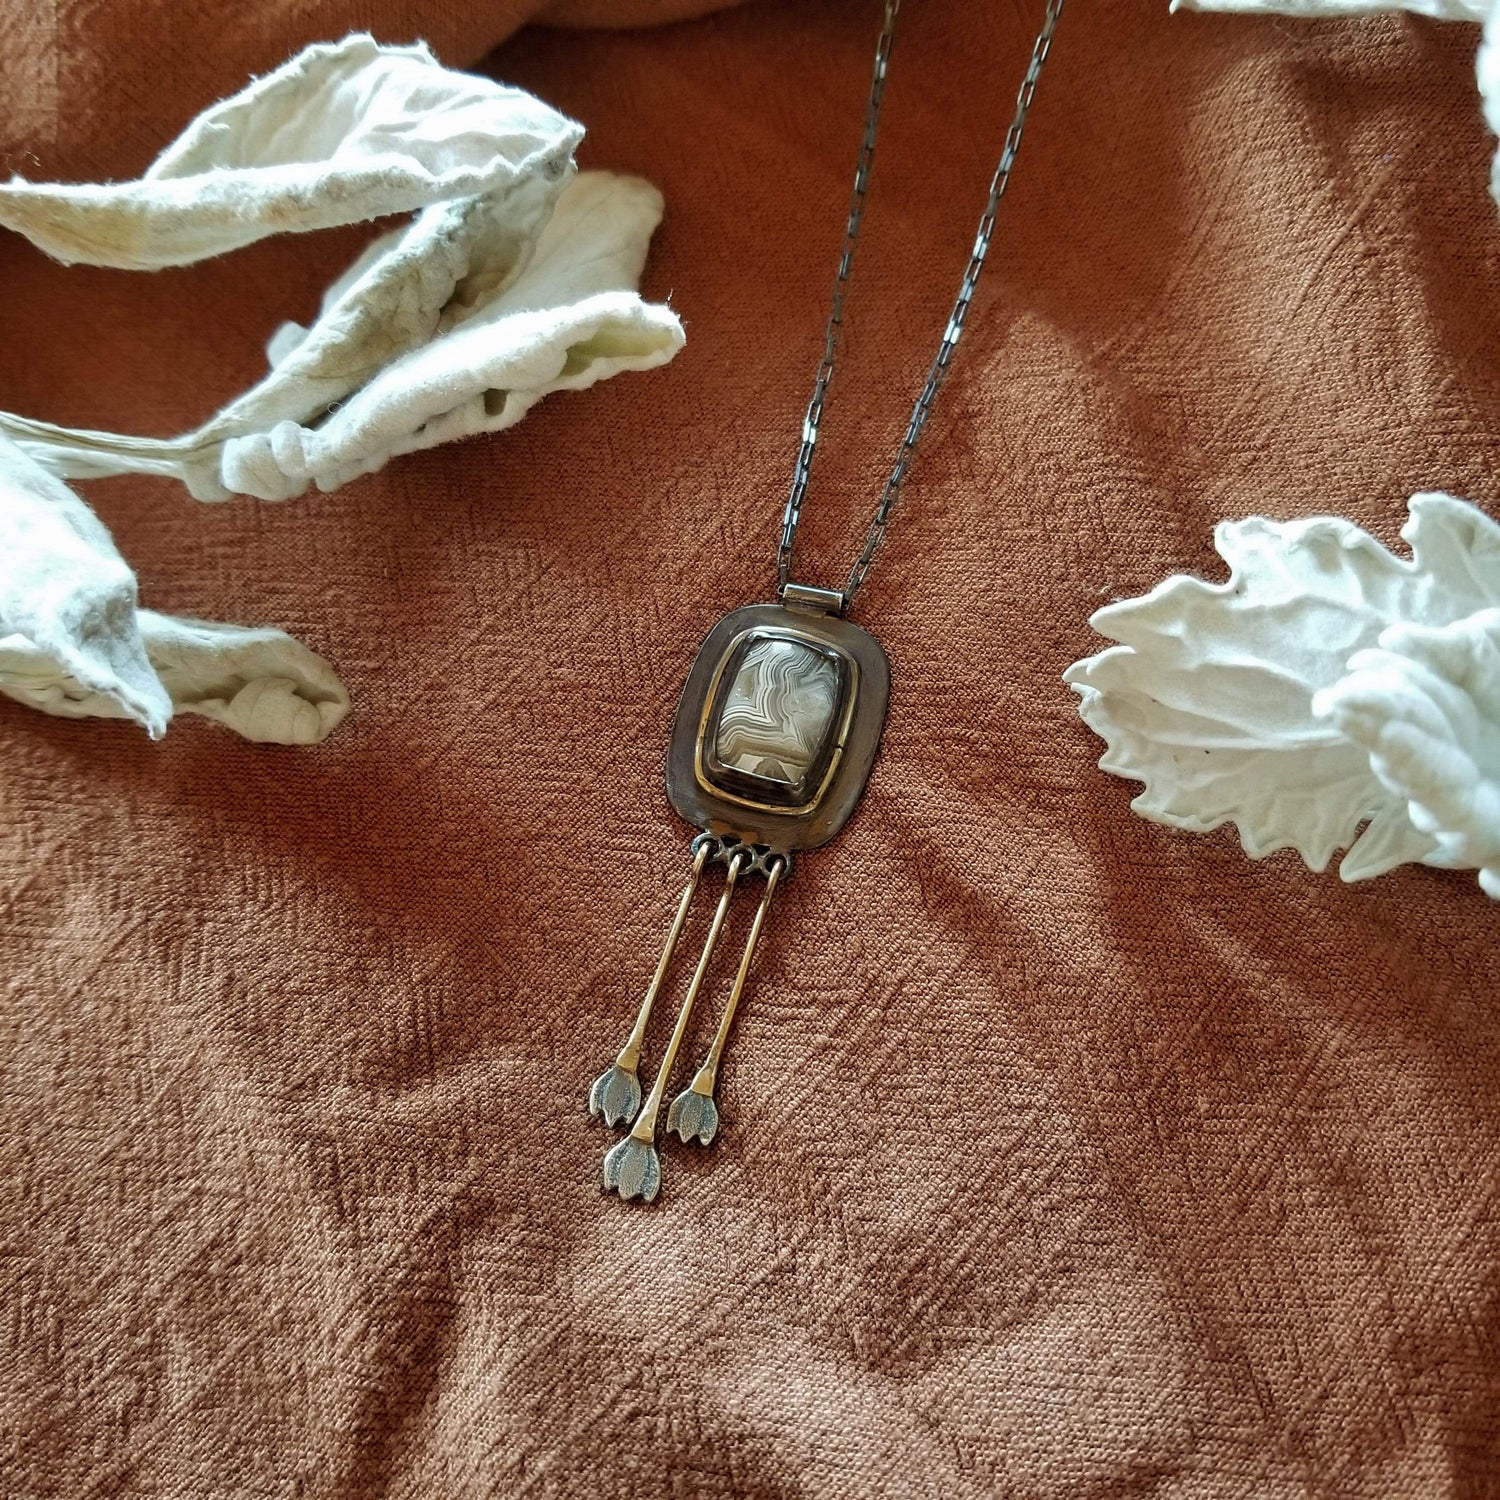 Snowdrop Necklace No. 1 - Cushion cut (rounded rectangle) Mexican Agate set in sterling silver and brass with 3 individual hand engraved snowdrop flowers hanging from brass fringe. All hanging from a sterling silver box chain. 